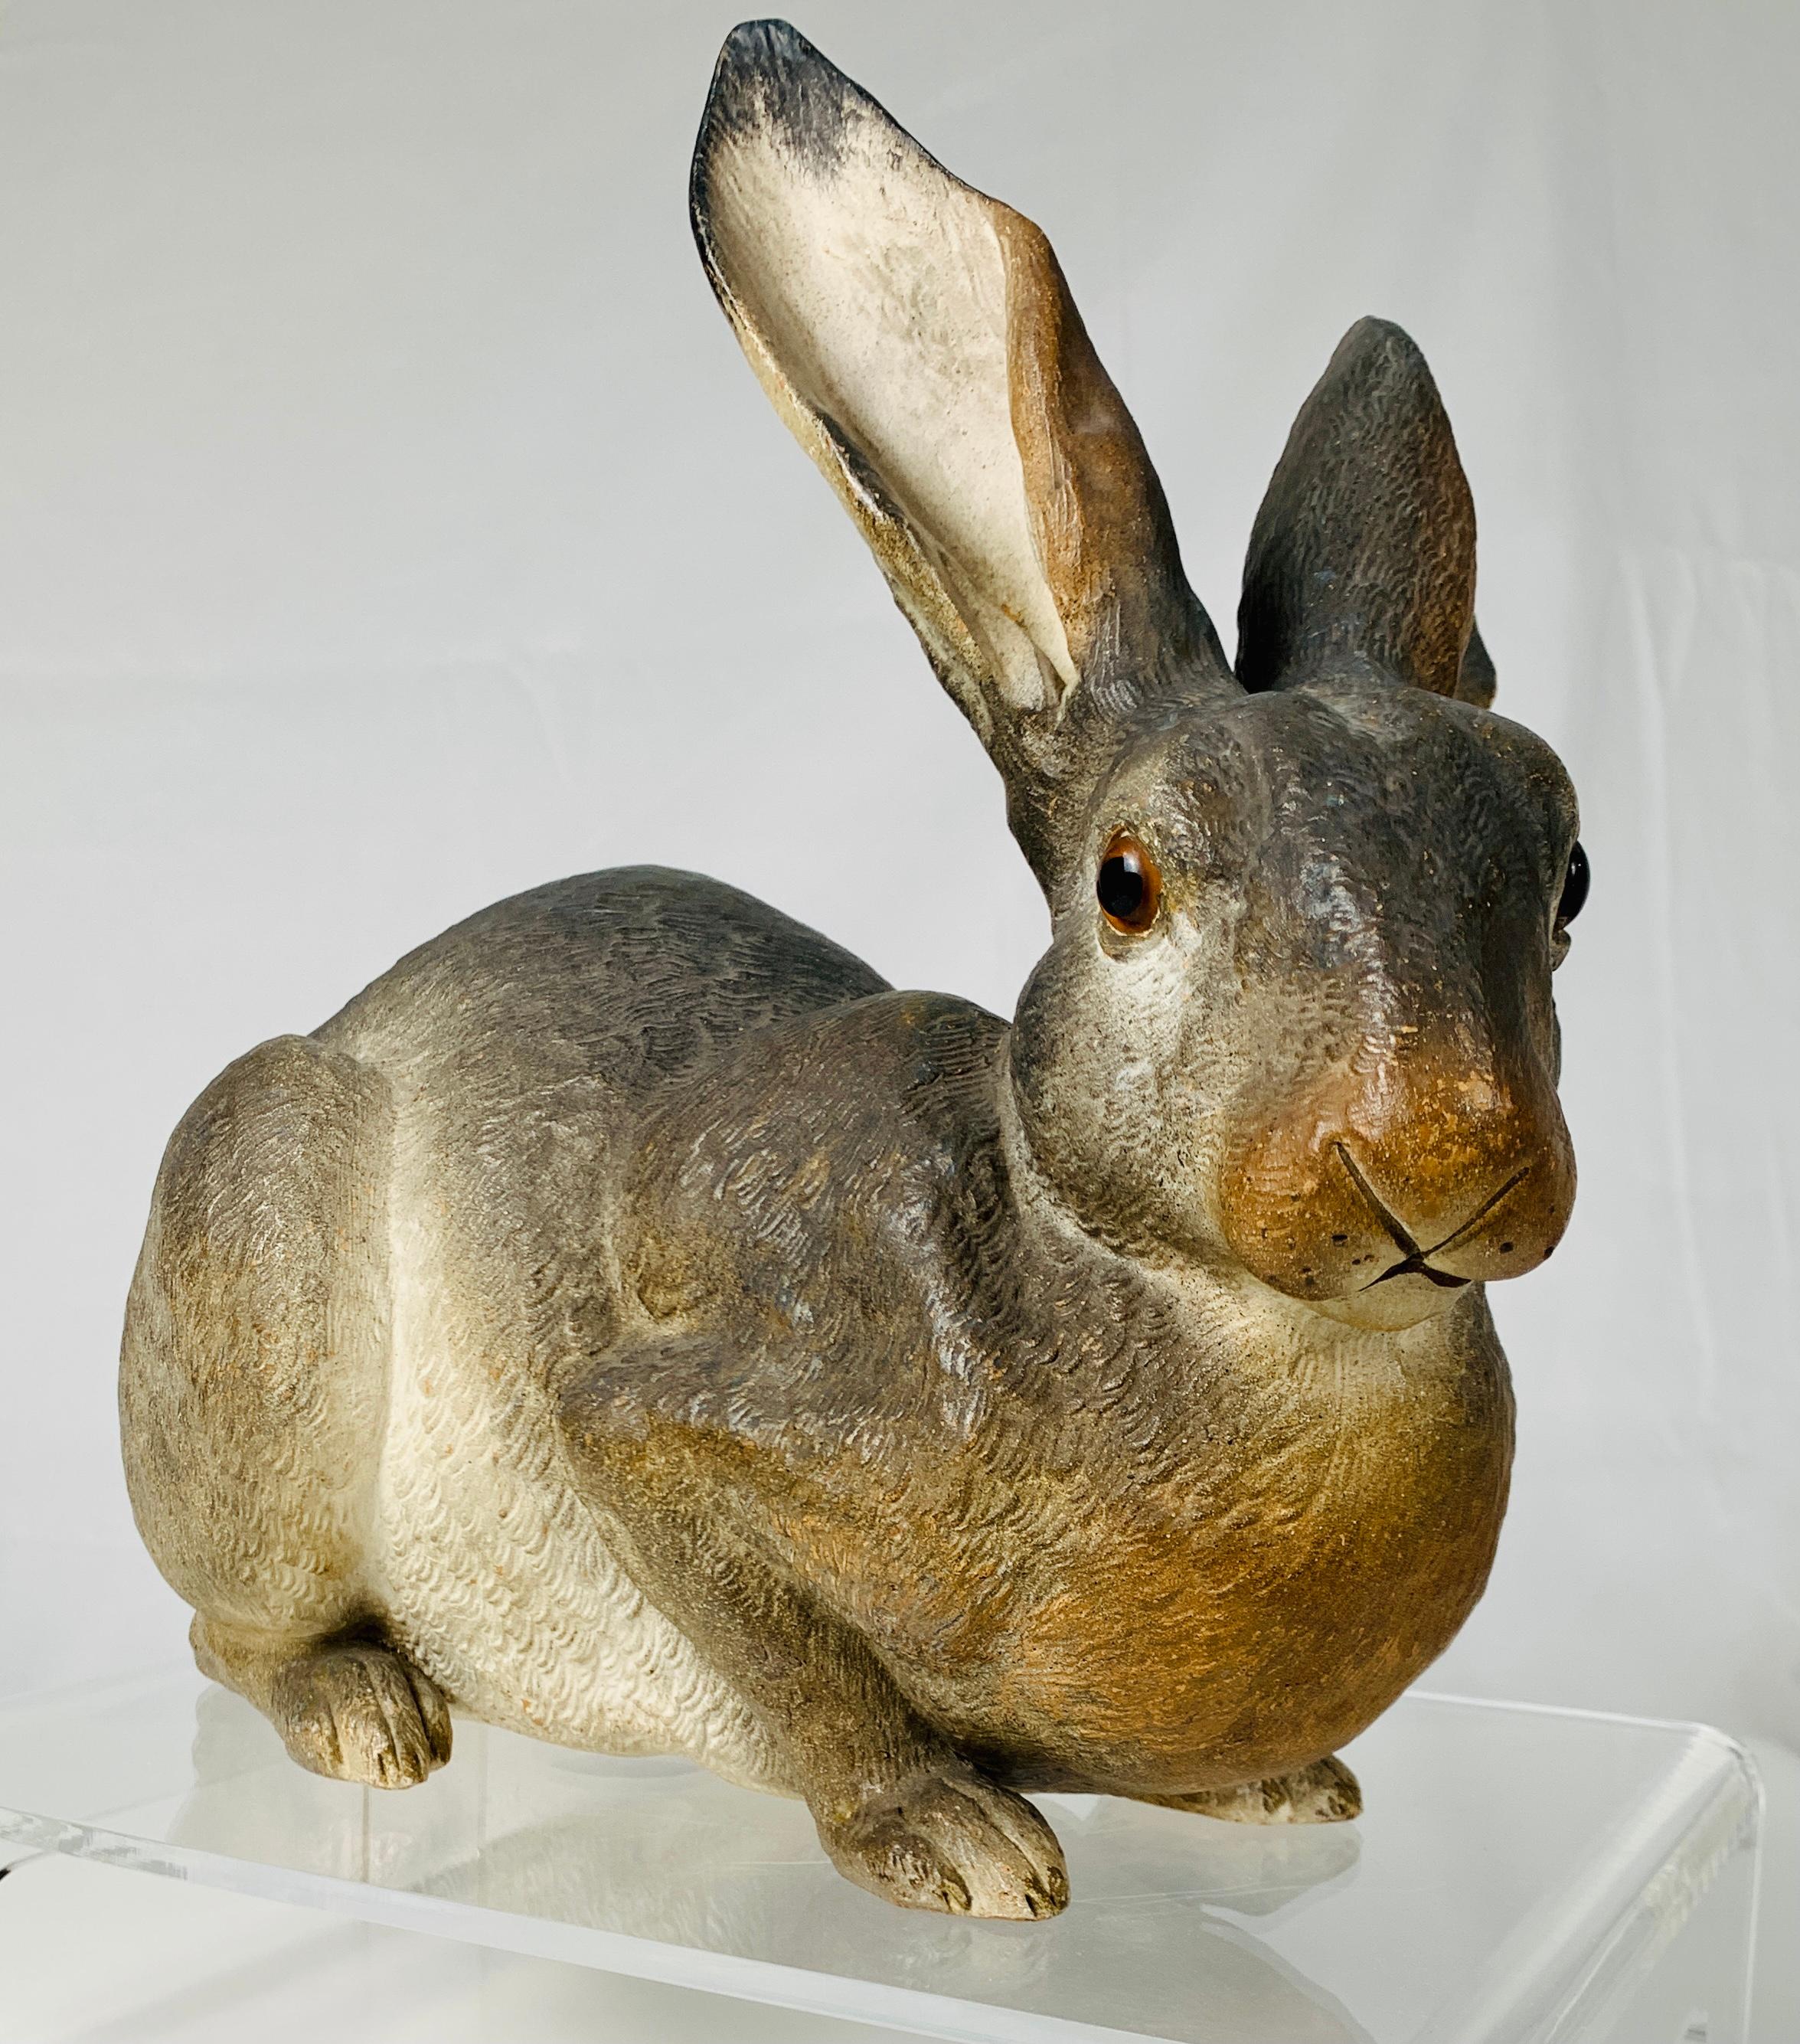 This is a lovely life-size hand-painted rabbit expertly modeled in terracotta. Combining a high-quality model and terrific painting with great attention to detail created this realistic sculpture that is so life-like. She has personality: sitting